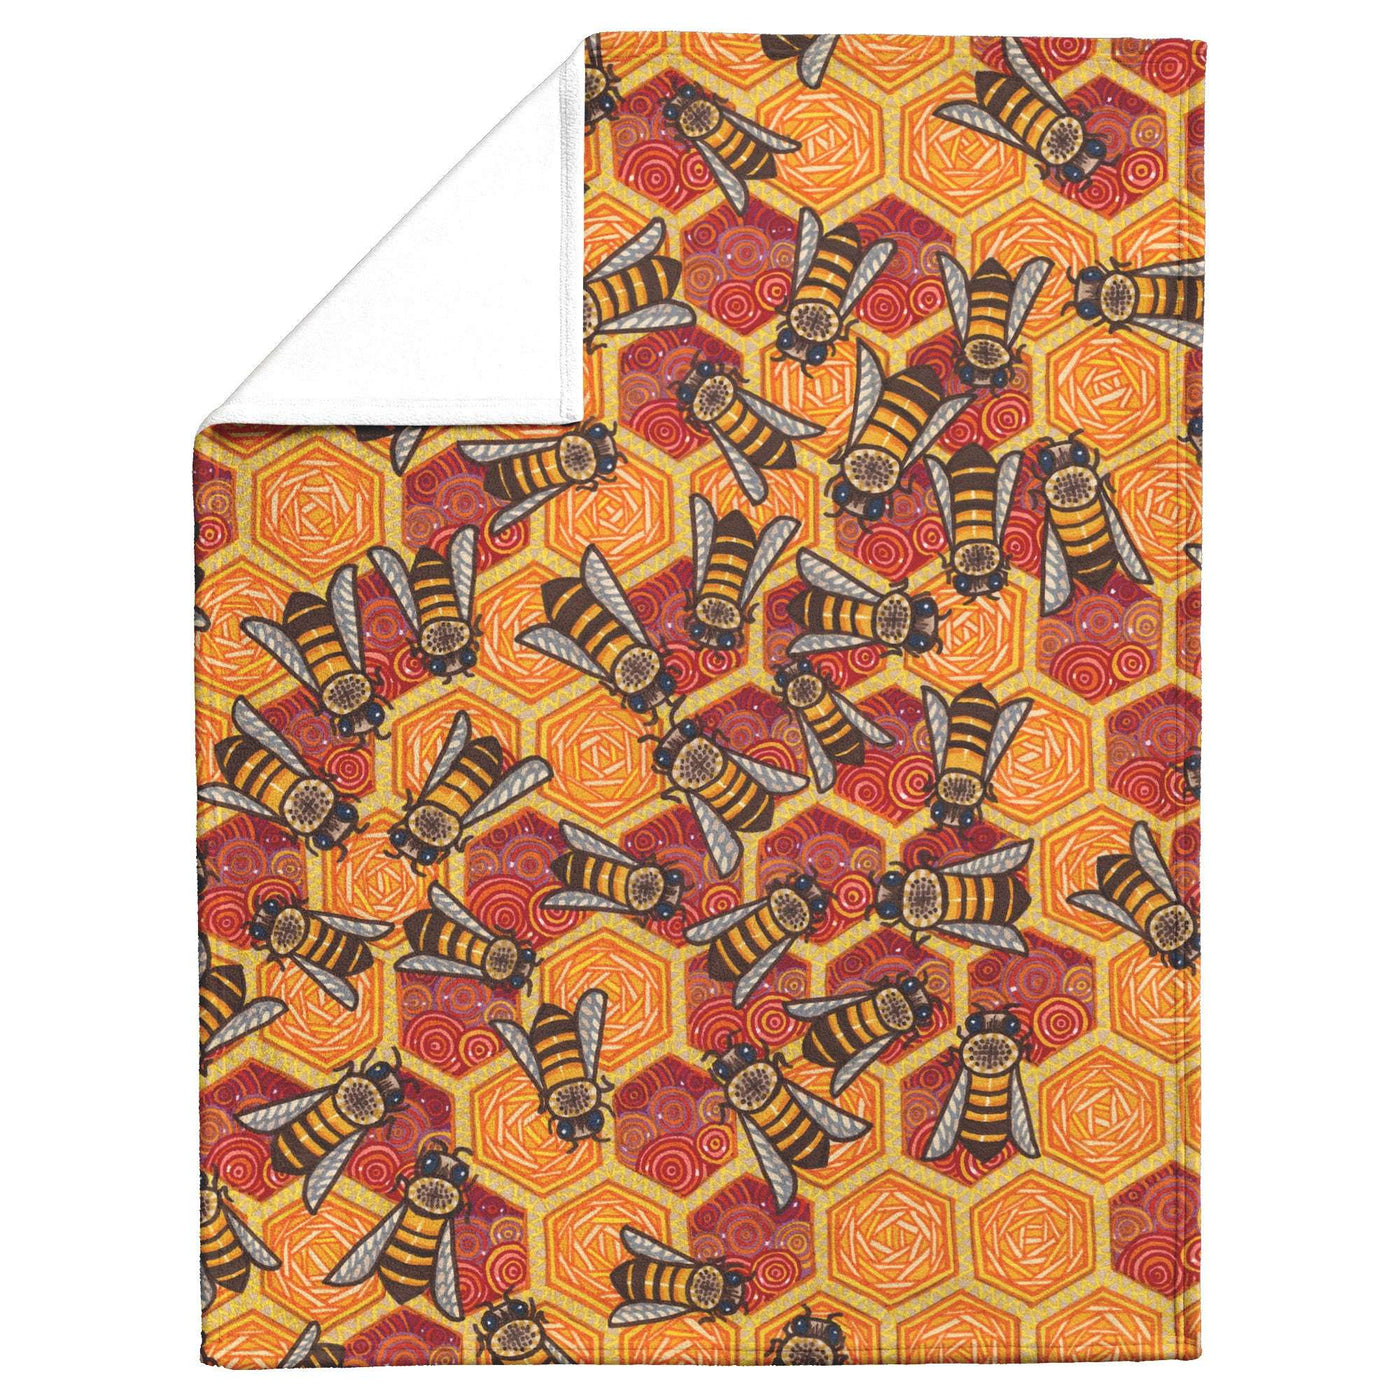 A blanket with a decorative pattern featuring bees and hexagonal shapes in shades of orange and brown, one corner is folded to show the fleece texture